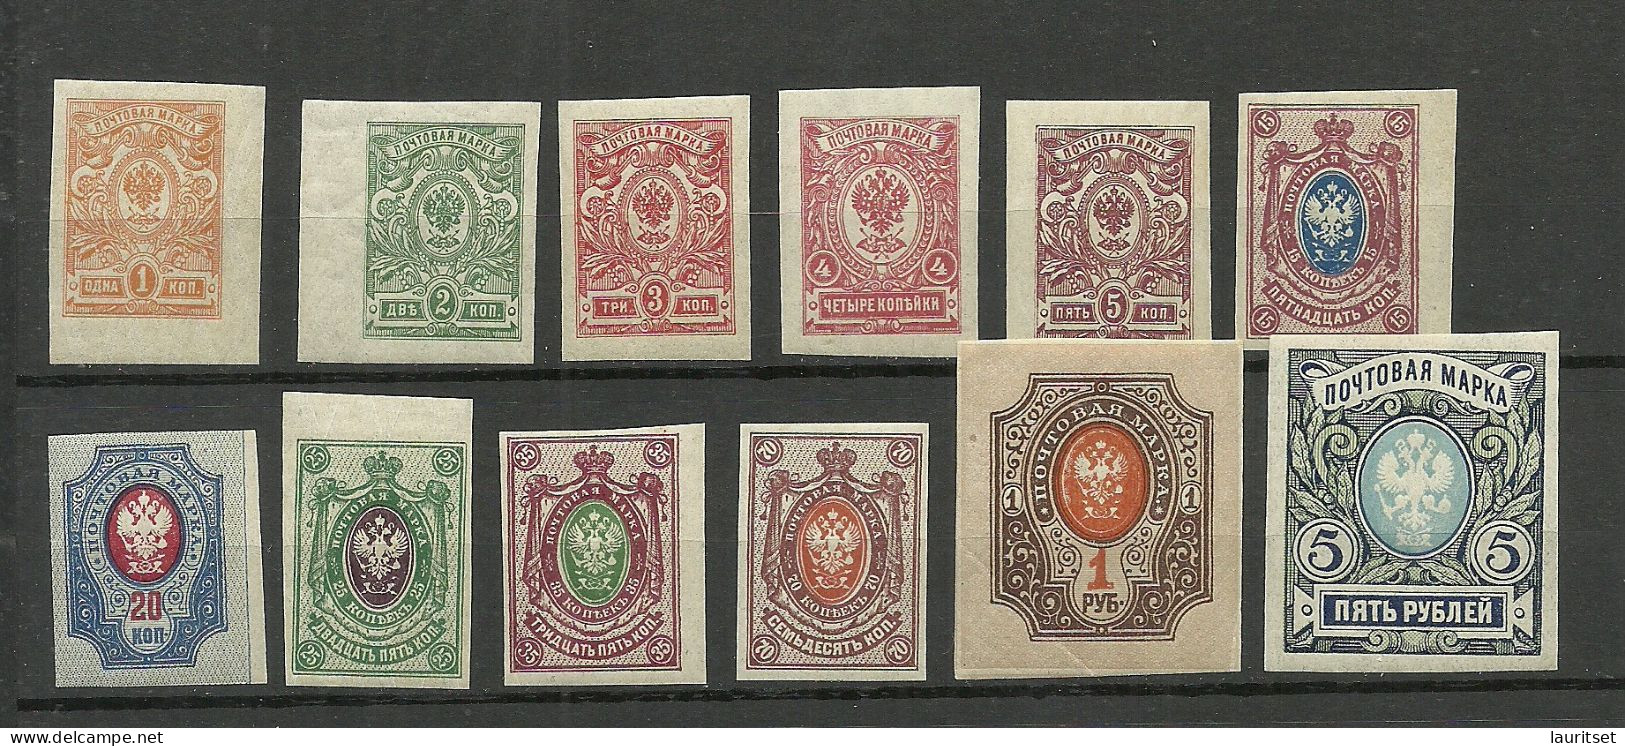 RUSSLAND RUSSIA 1917 = 12 Values From Set Michel 63 - 81 B MNH - Neufs